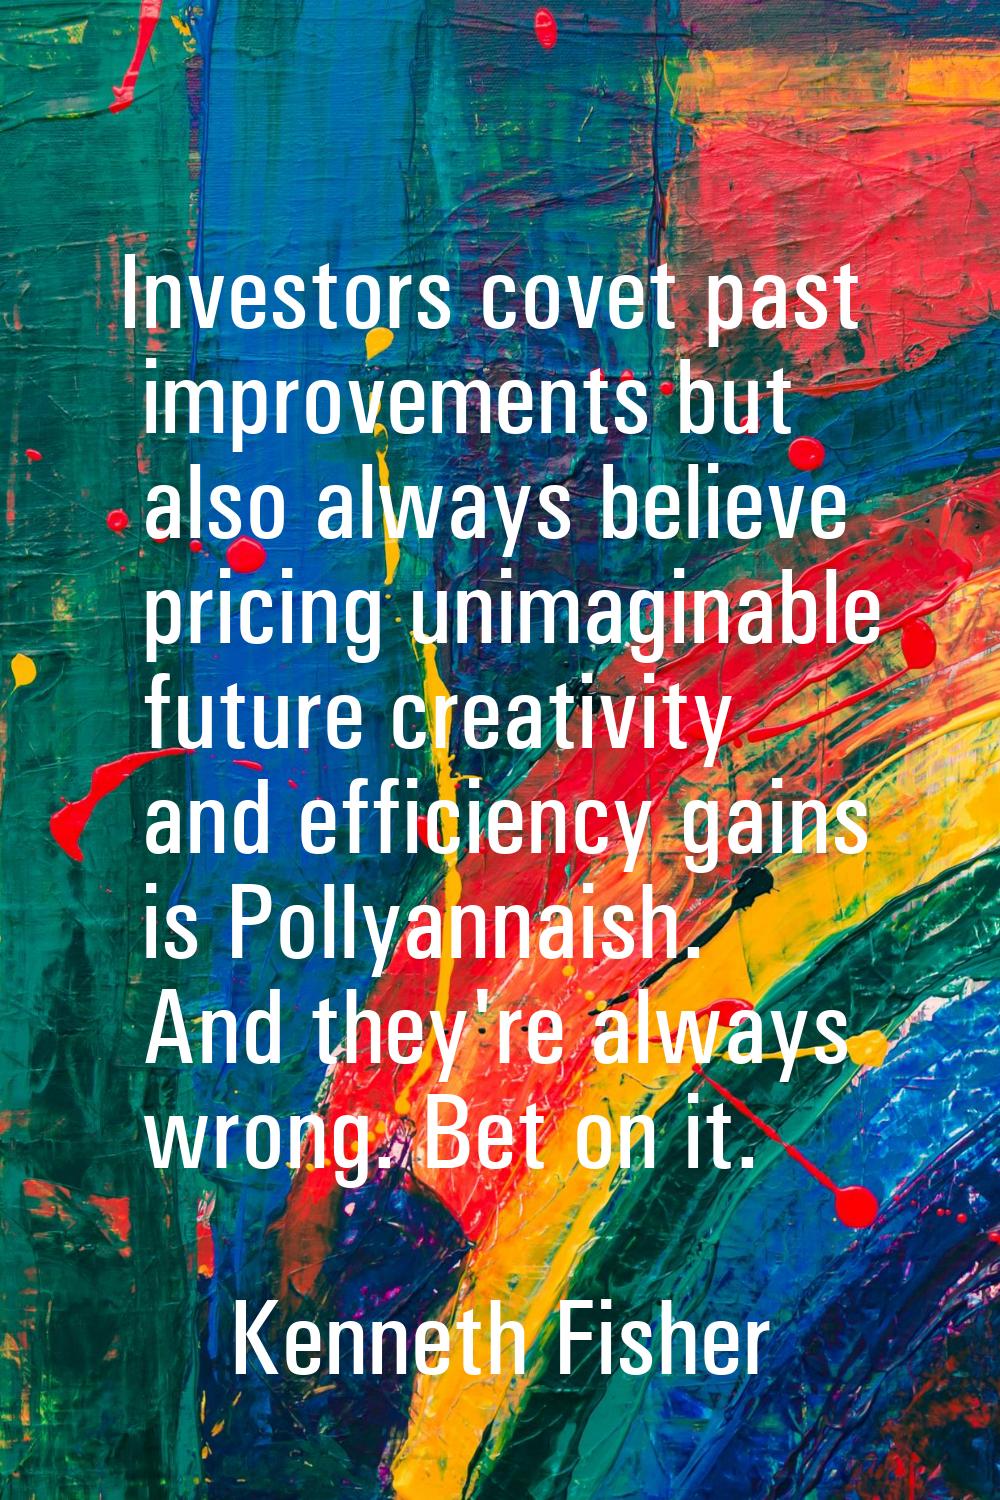 Investors covet past improvements but also always believe pricing unimaginable future creativity an